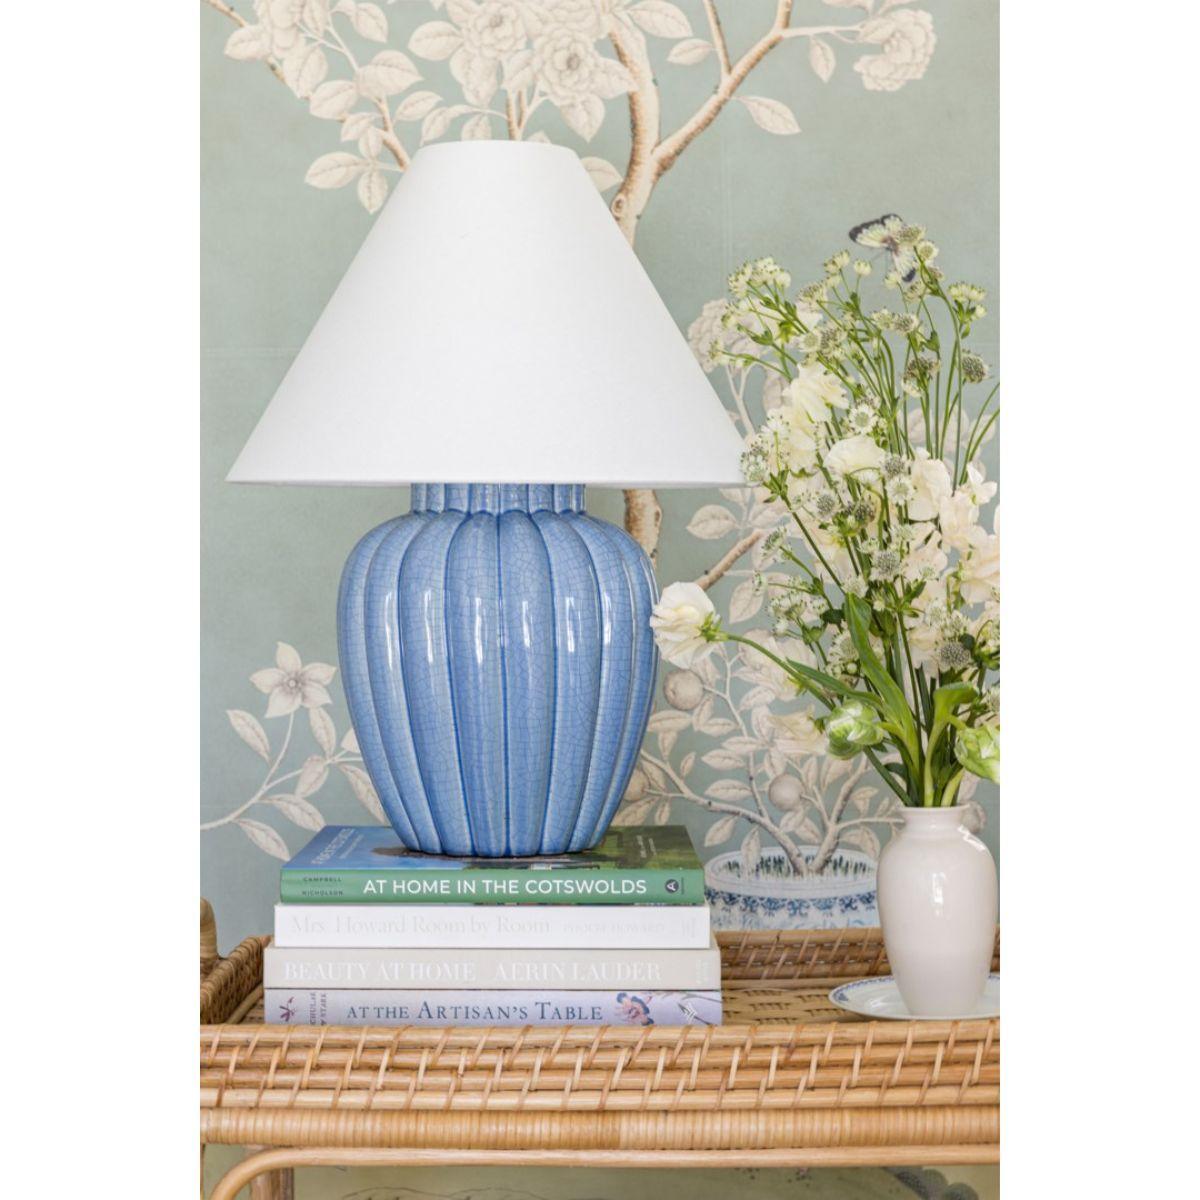 Clarendon Table Lamp Ceramic Ariel Okin Blue with Aged Brass Accents